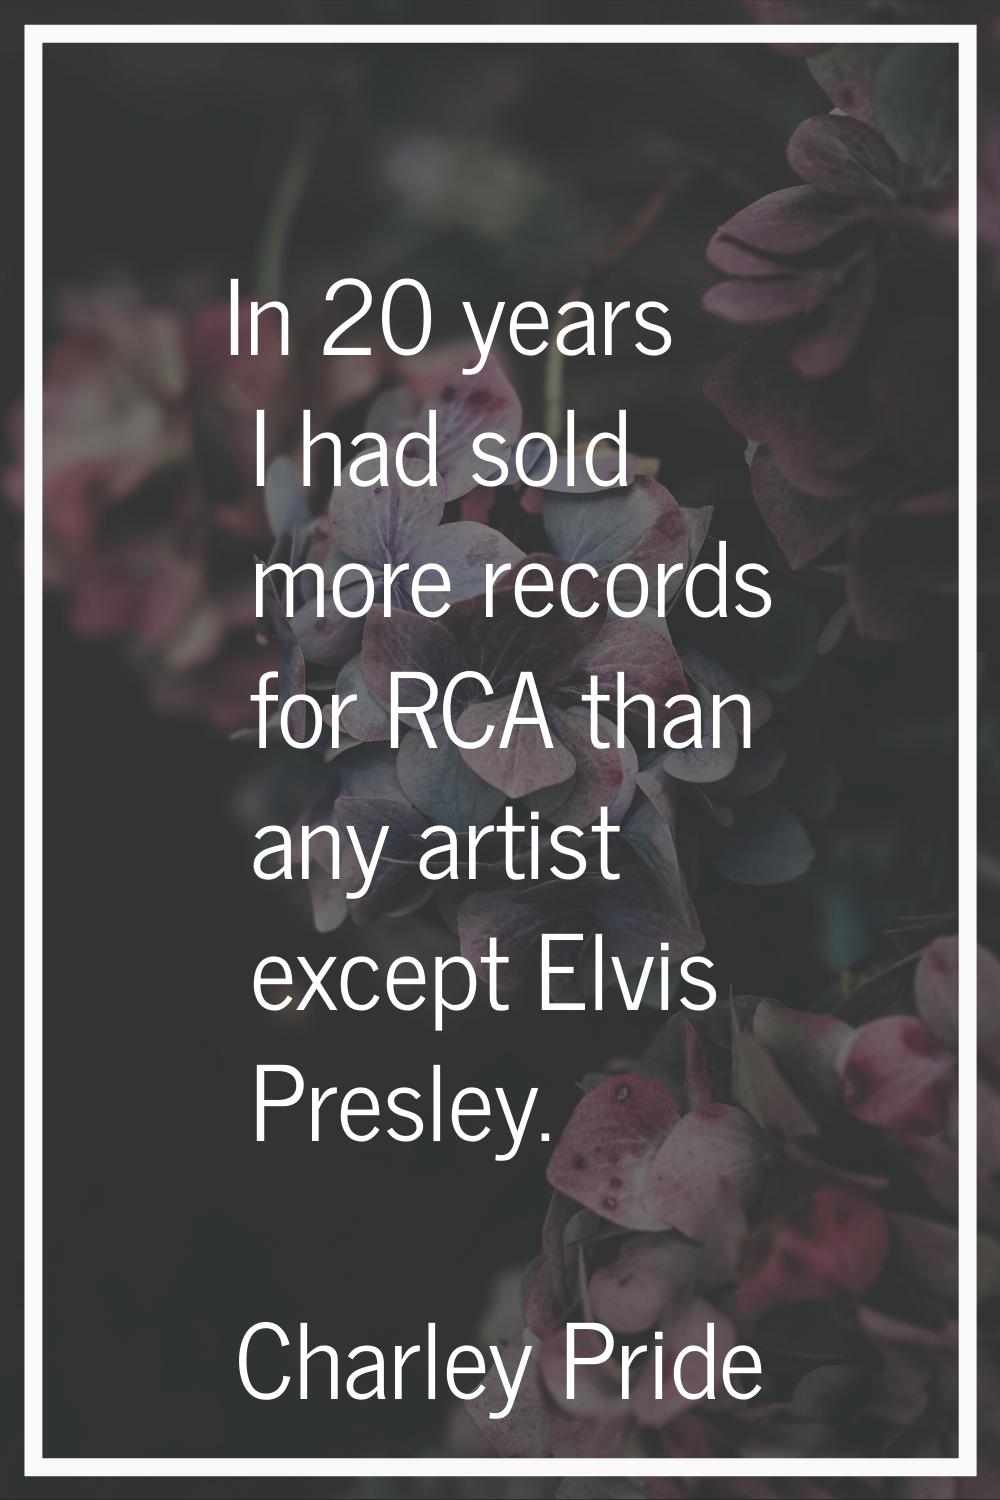 In 20 years I had sold more records for RCA than any artist except Elvis Presley.